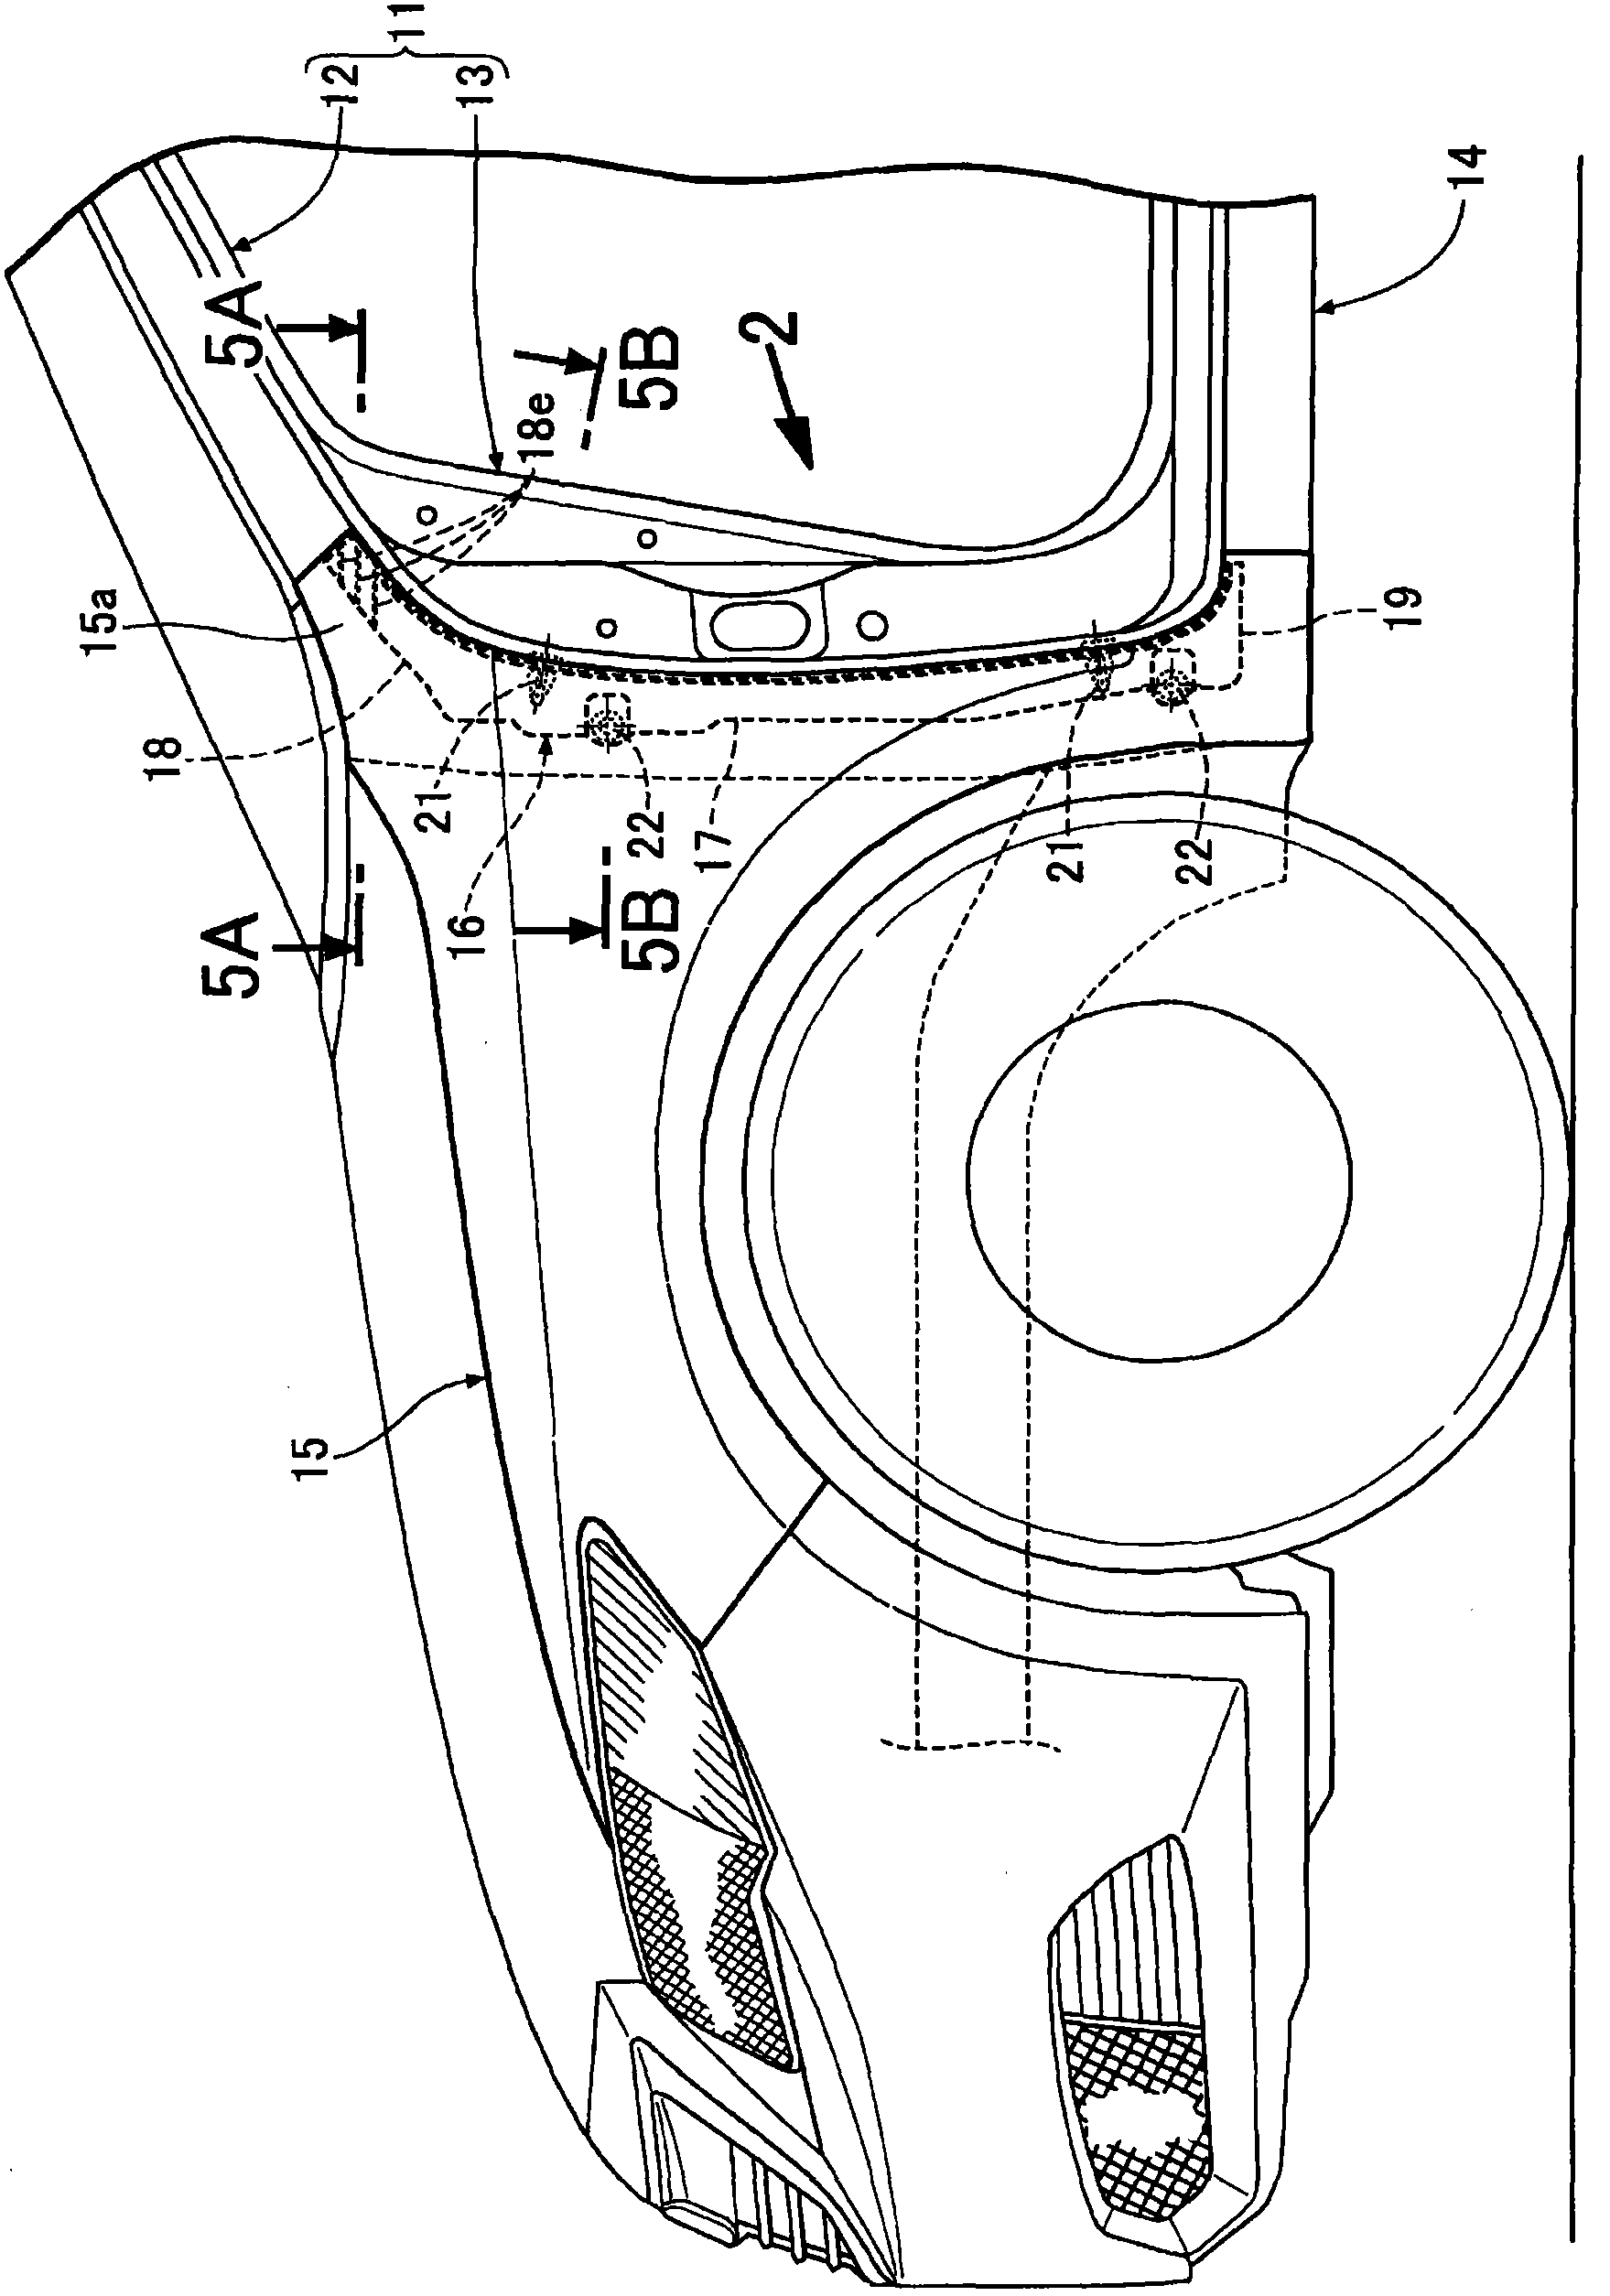 Vehicle body structure for automobile